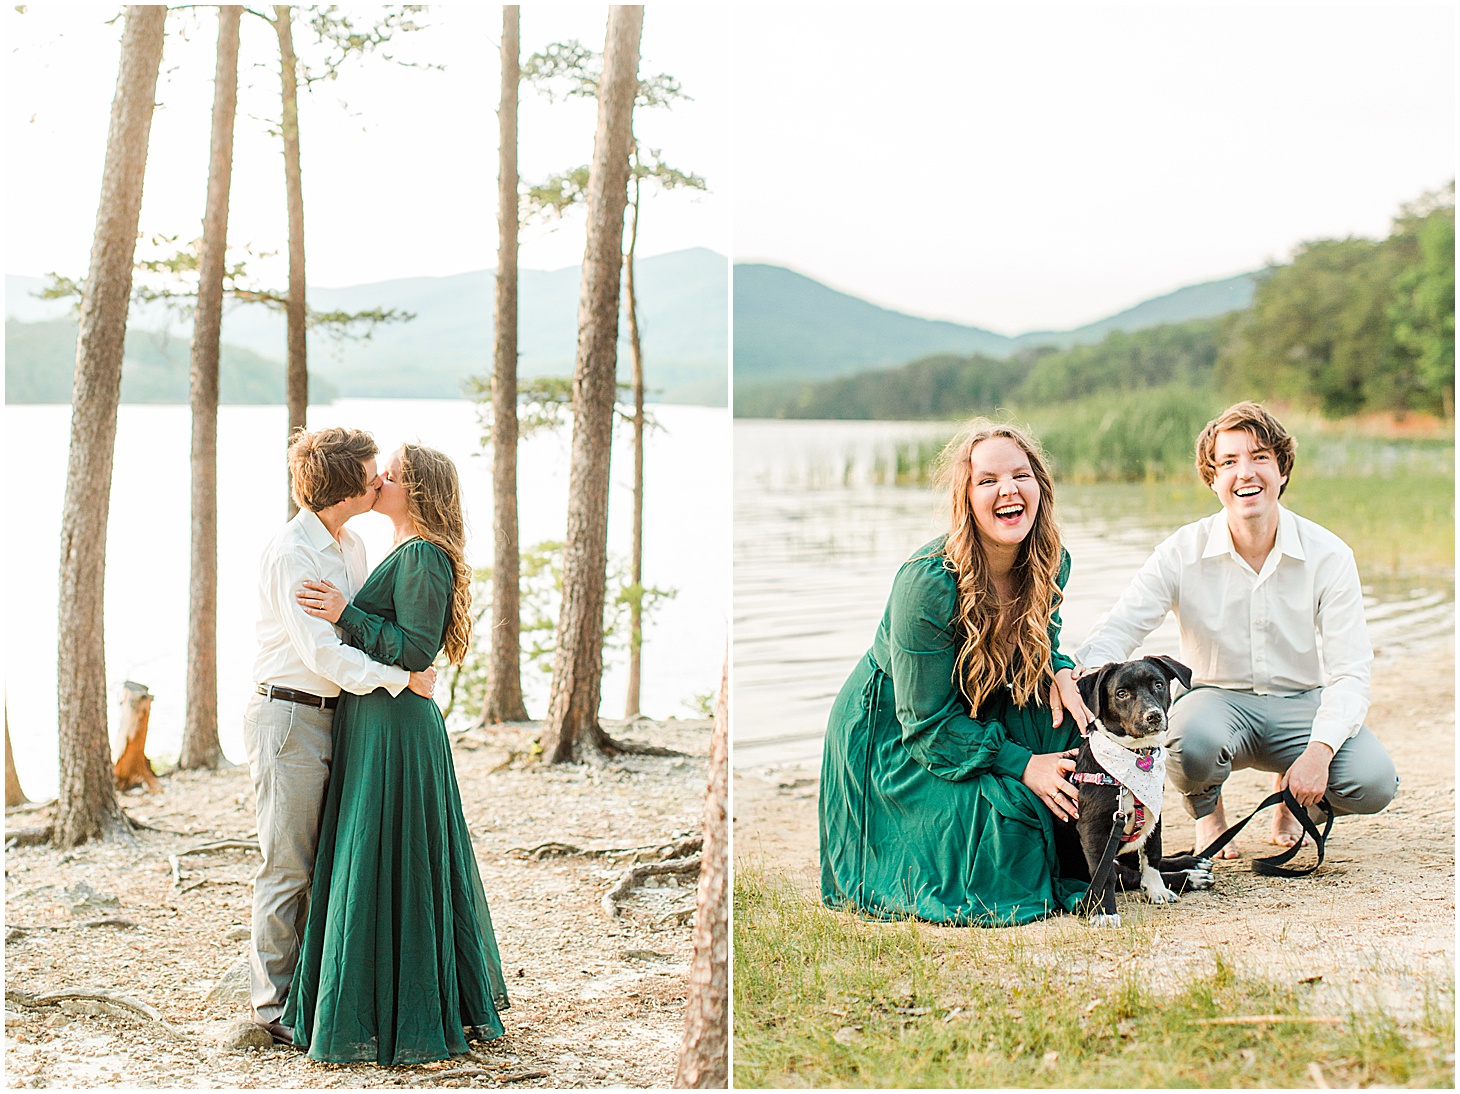 carvinscoveengagementsession_roanokeengagementsession_carvinscove_virginiawedding_virginiaweddingphotographer_vaweddingphotographer_photo_0072.jpg